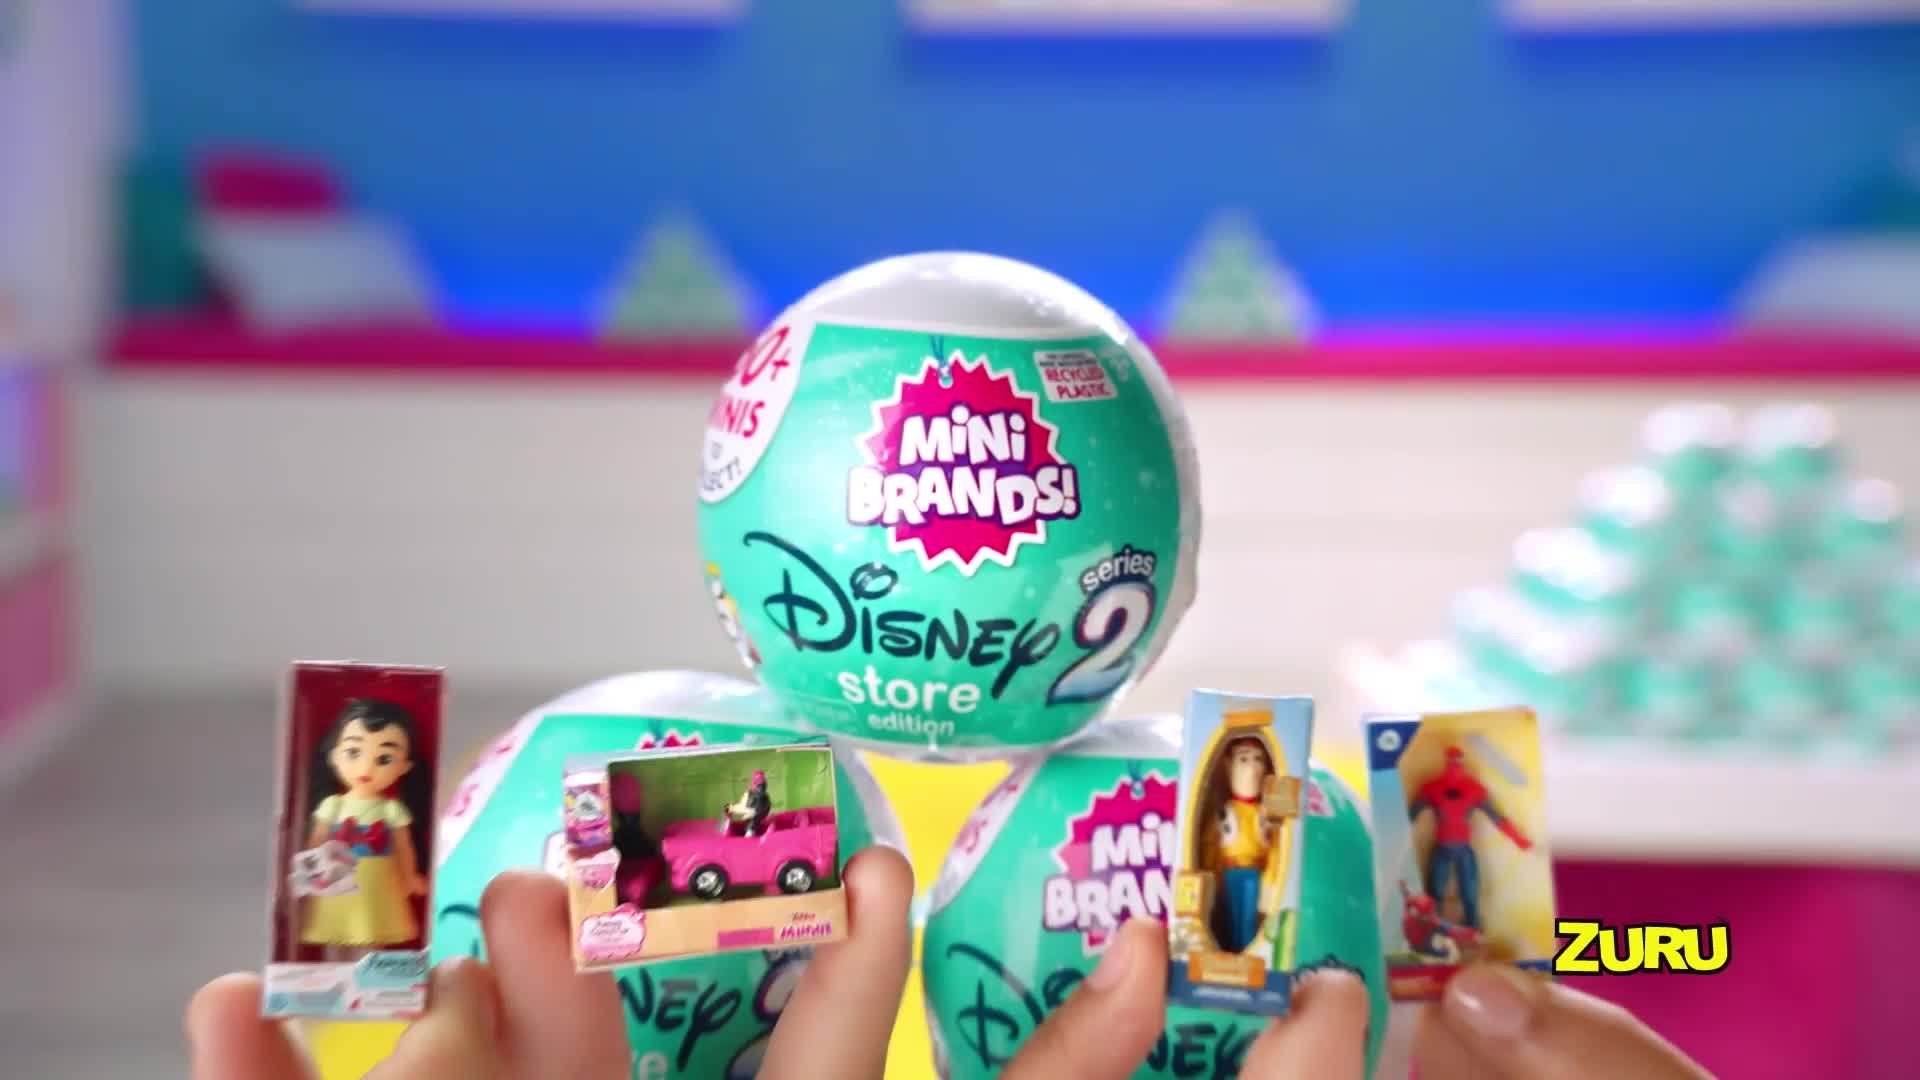 5 Surprise Mini Brands Disney Store Edition Mystery Pack - One Ball